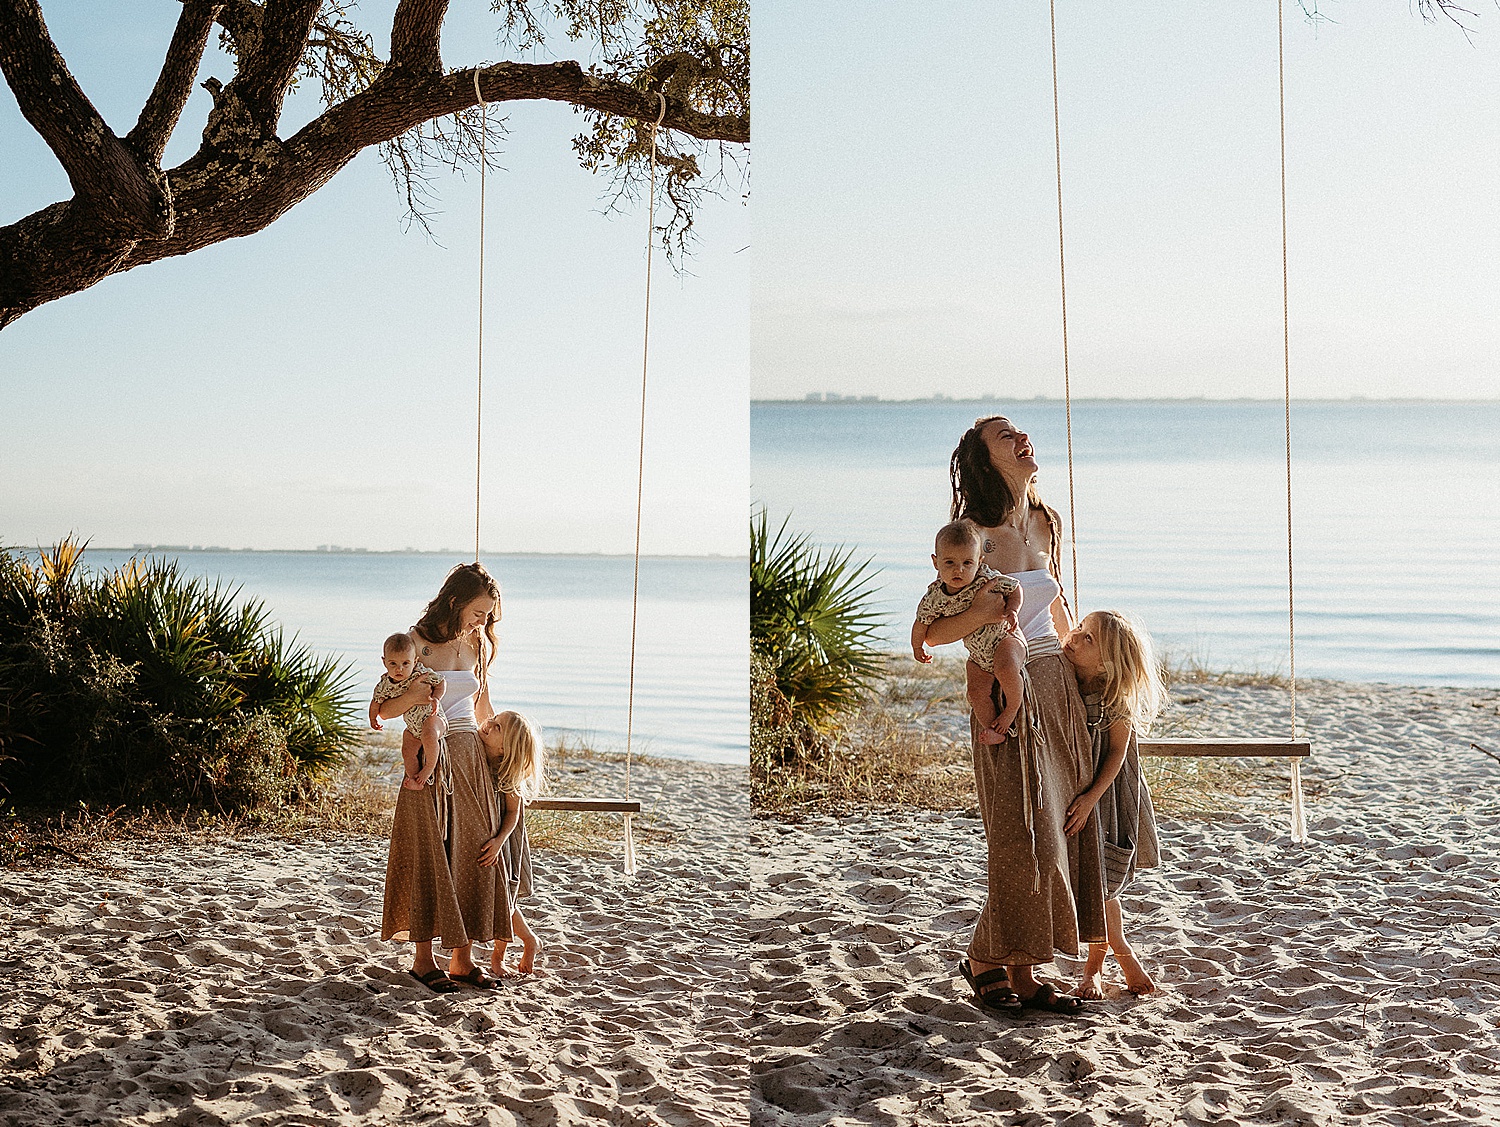 secluded family on the beach with daughter and baby son on swing